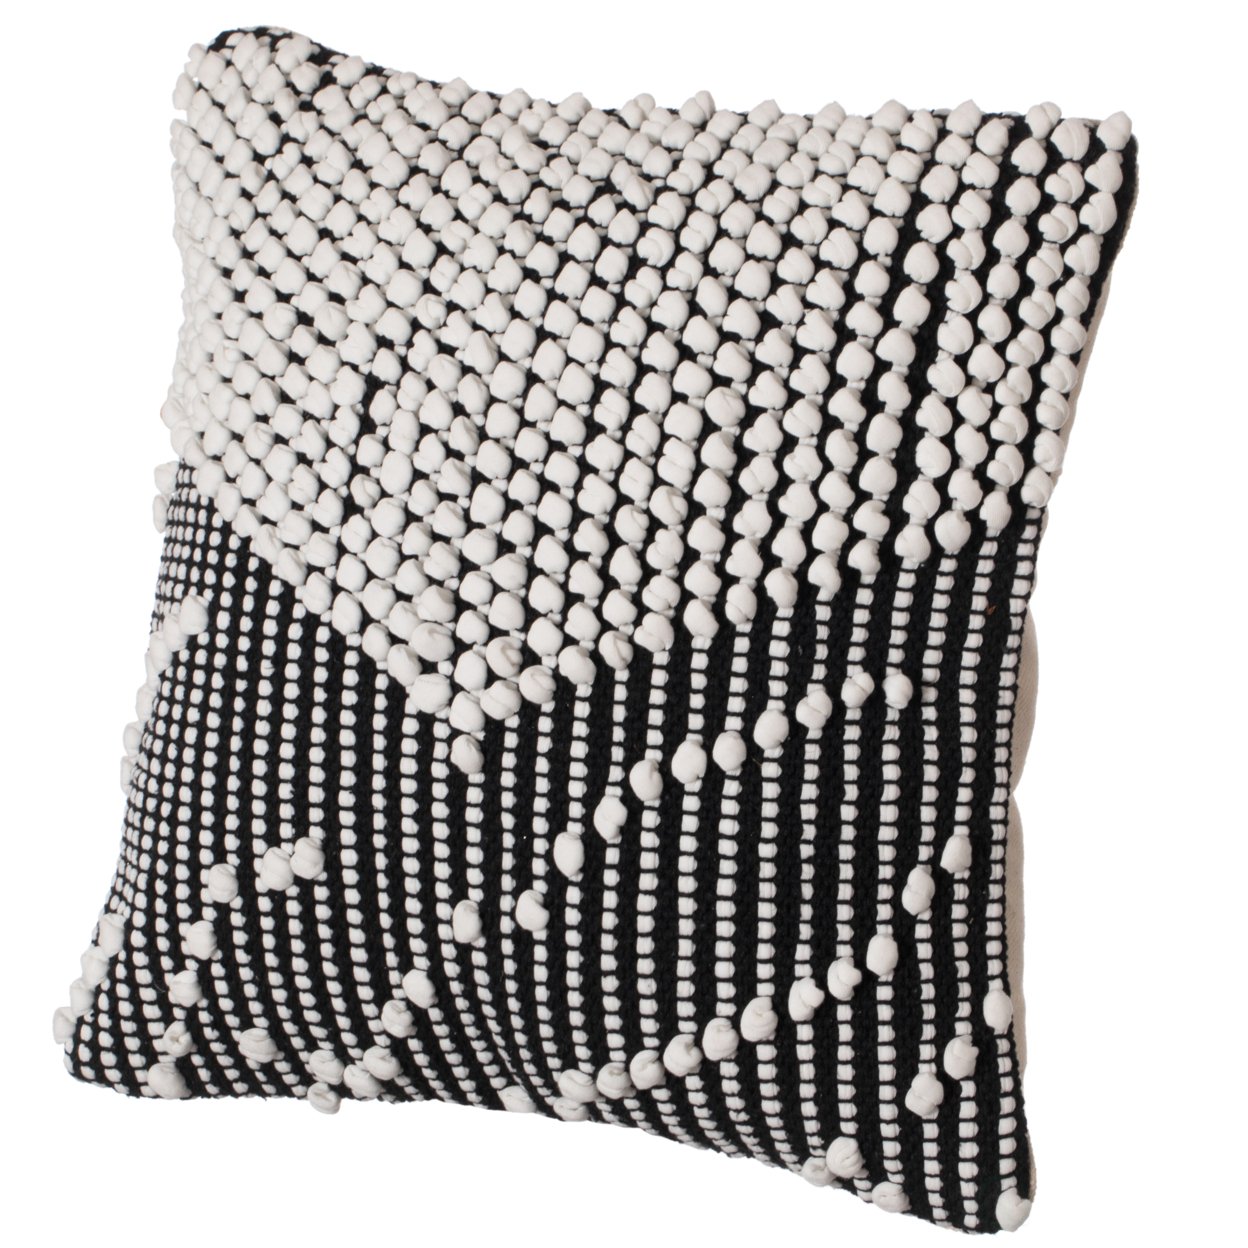 16 Decorative Handwoven Cotton Throw Pillow Cover With Embossed Dots - Black With Cushion